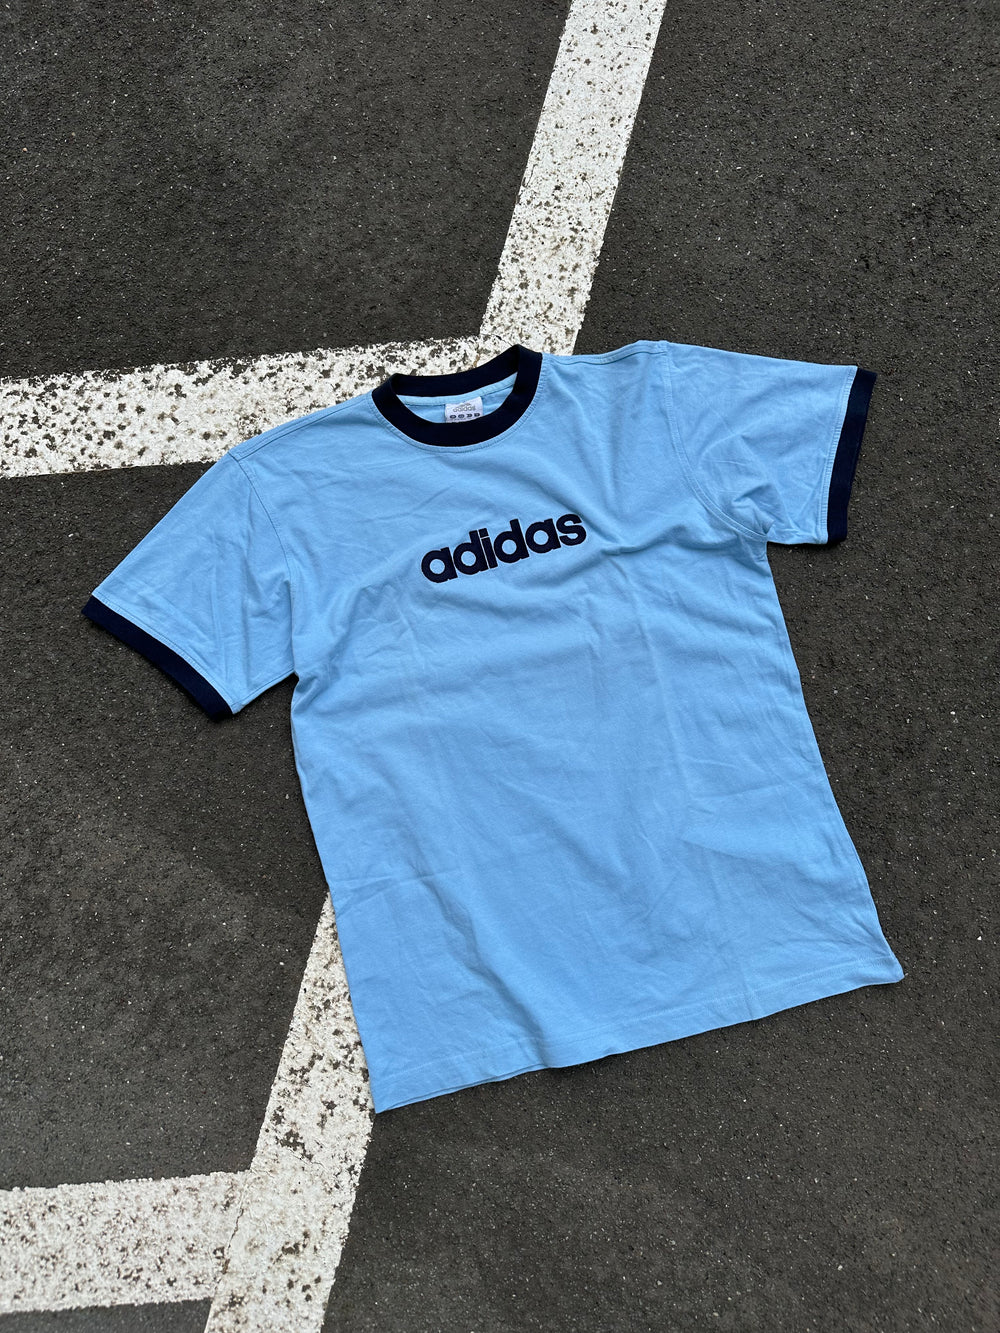 Early 2000s Adidas T-Shirt (L)